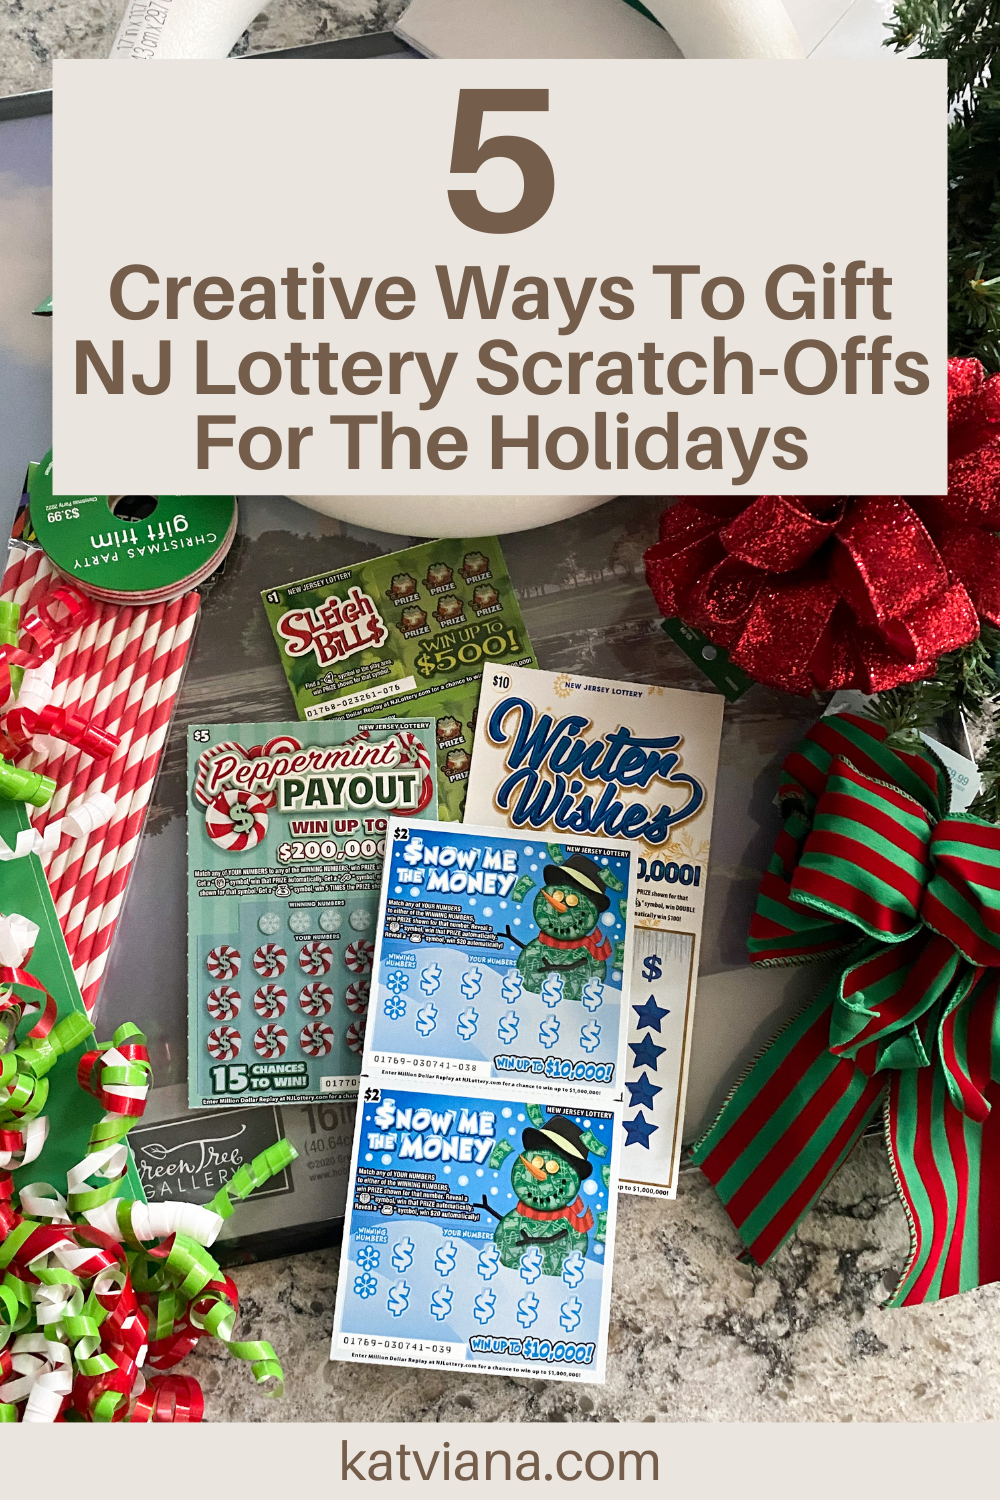 5 Creative Ways To Gift NJ Lottery Scratch-Offs For The Holidays